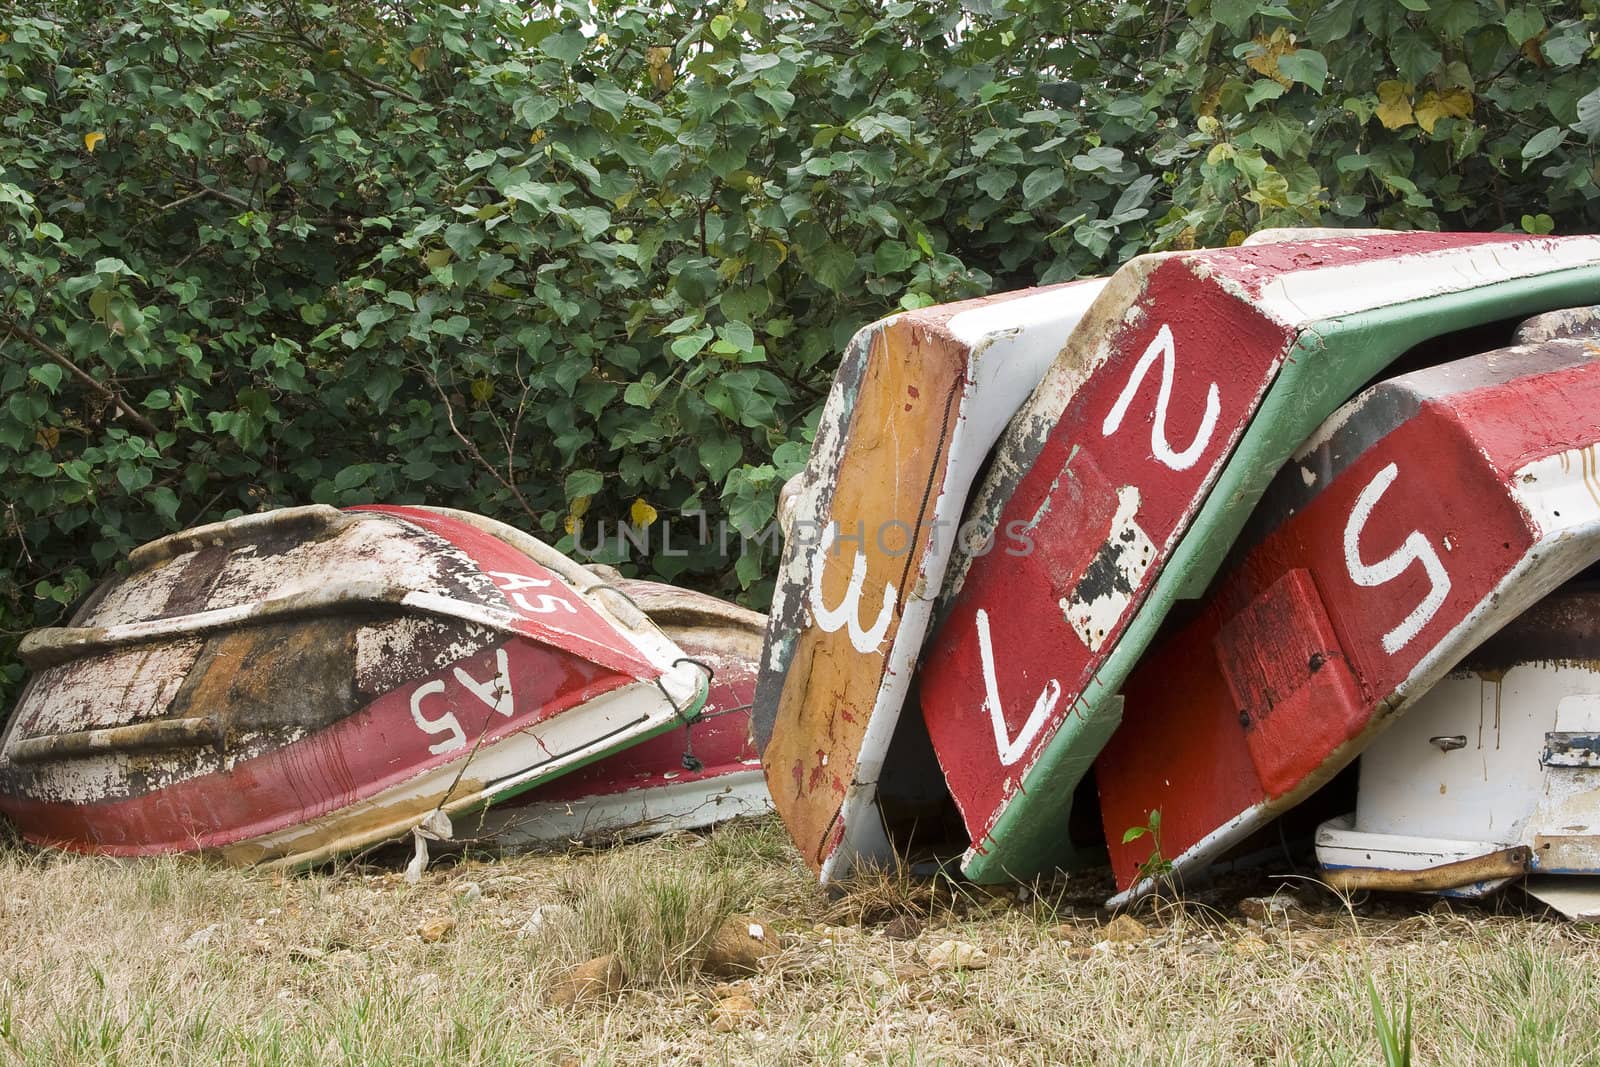 Old rental boats on the ground